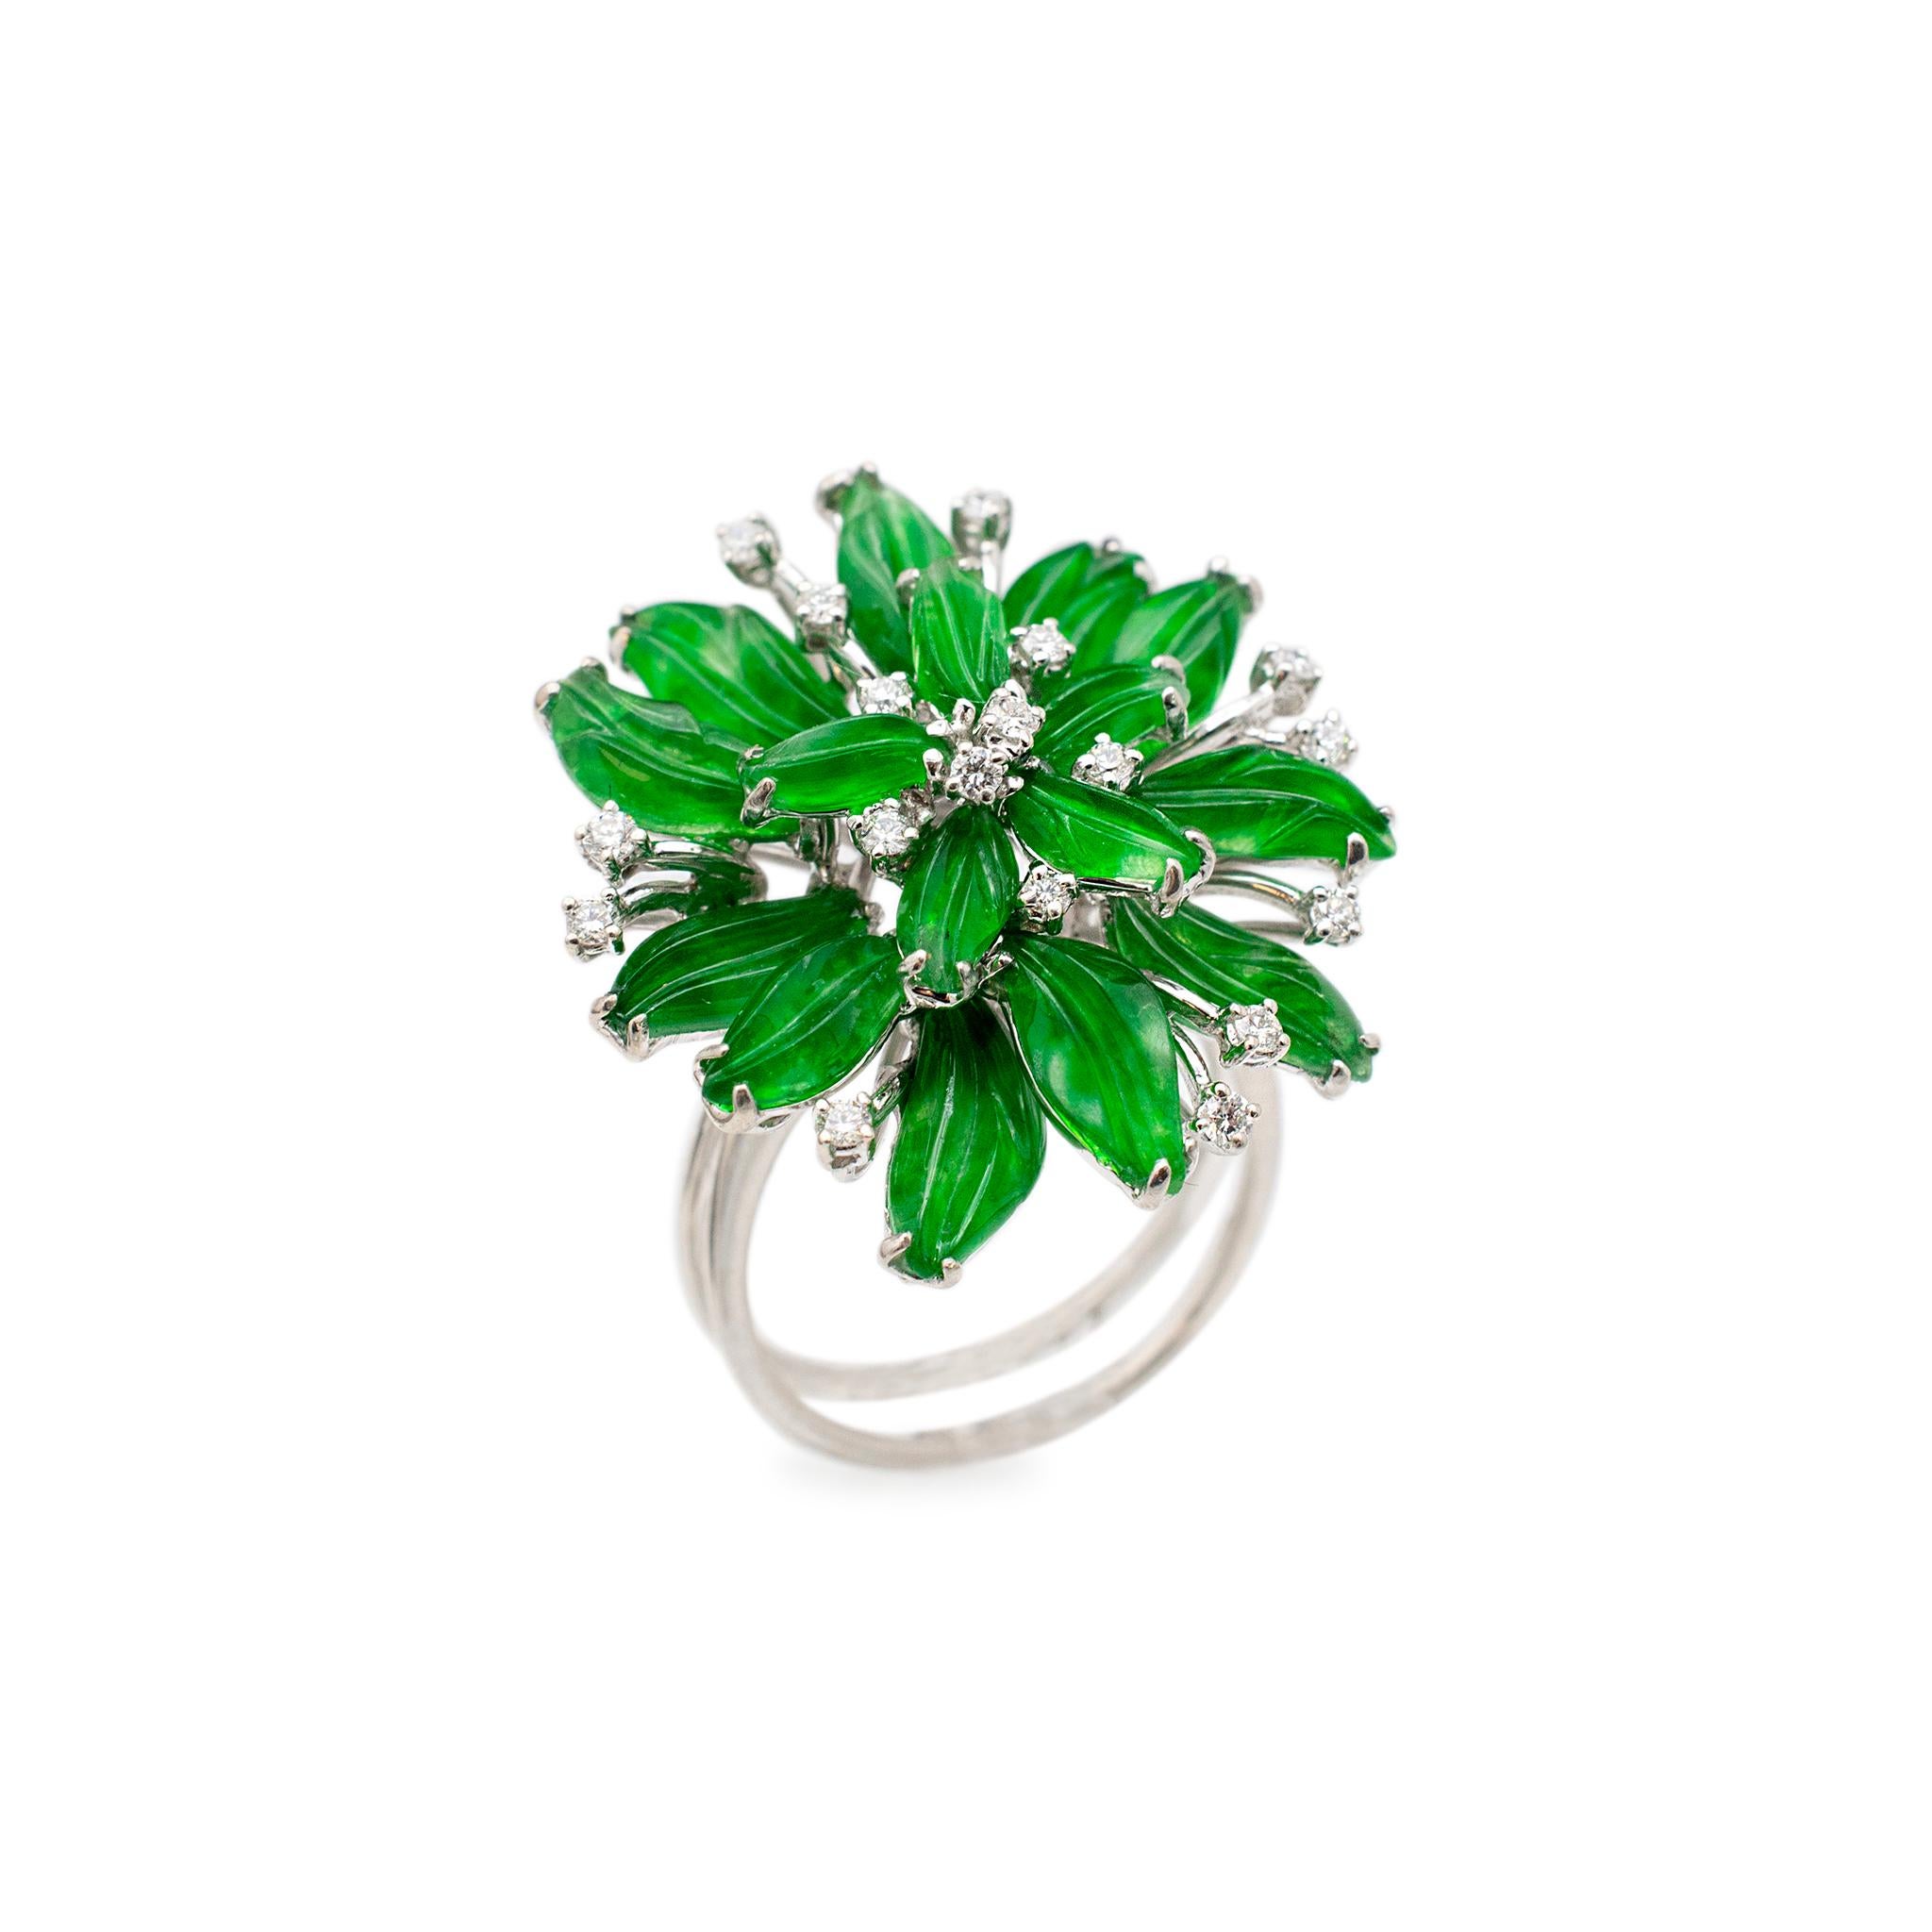 Gender: Ladies

Metal Type: 18K White Gold

Size: 6.5

Shank maximum width: 5.00 mm

Diameter: 25.00 mm

Weight: 9.82 grams

18K white gold diamond and jade cocktail ring with a split-shank. The metal was tested and determined to be 18K white gold.